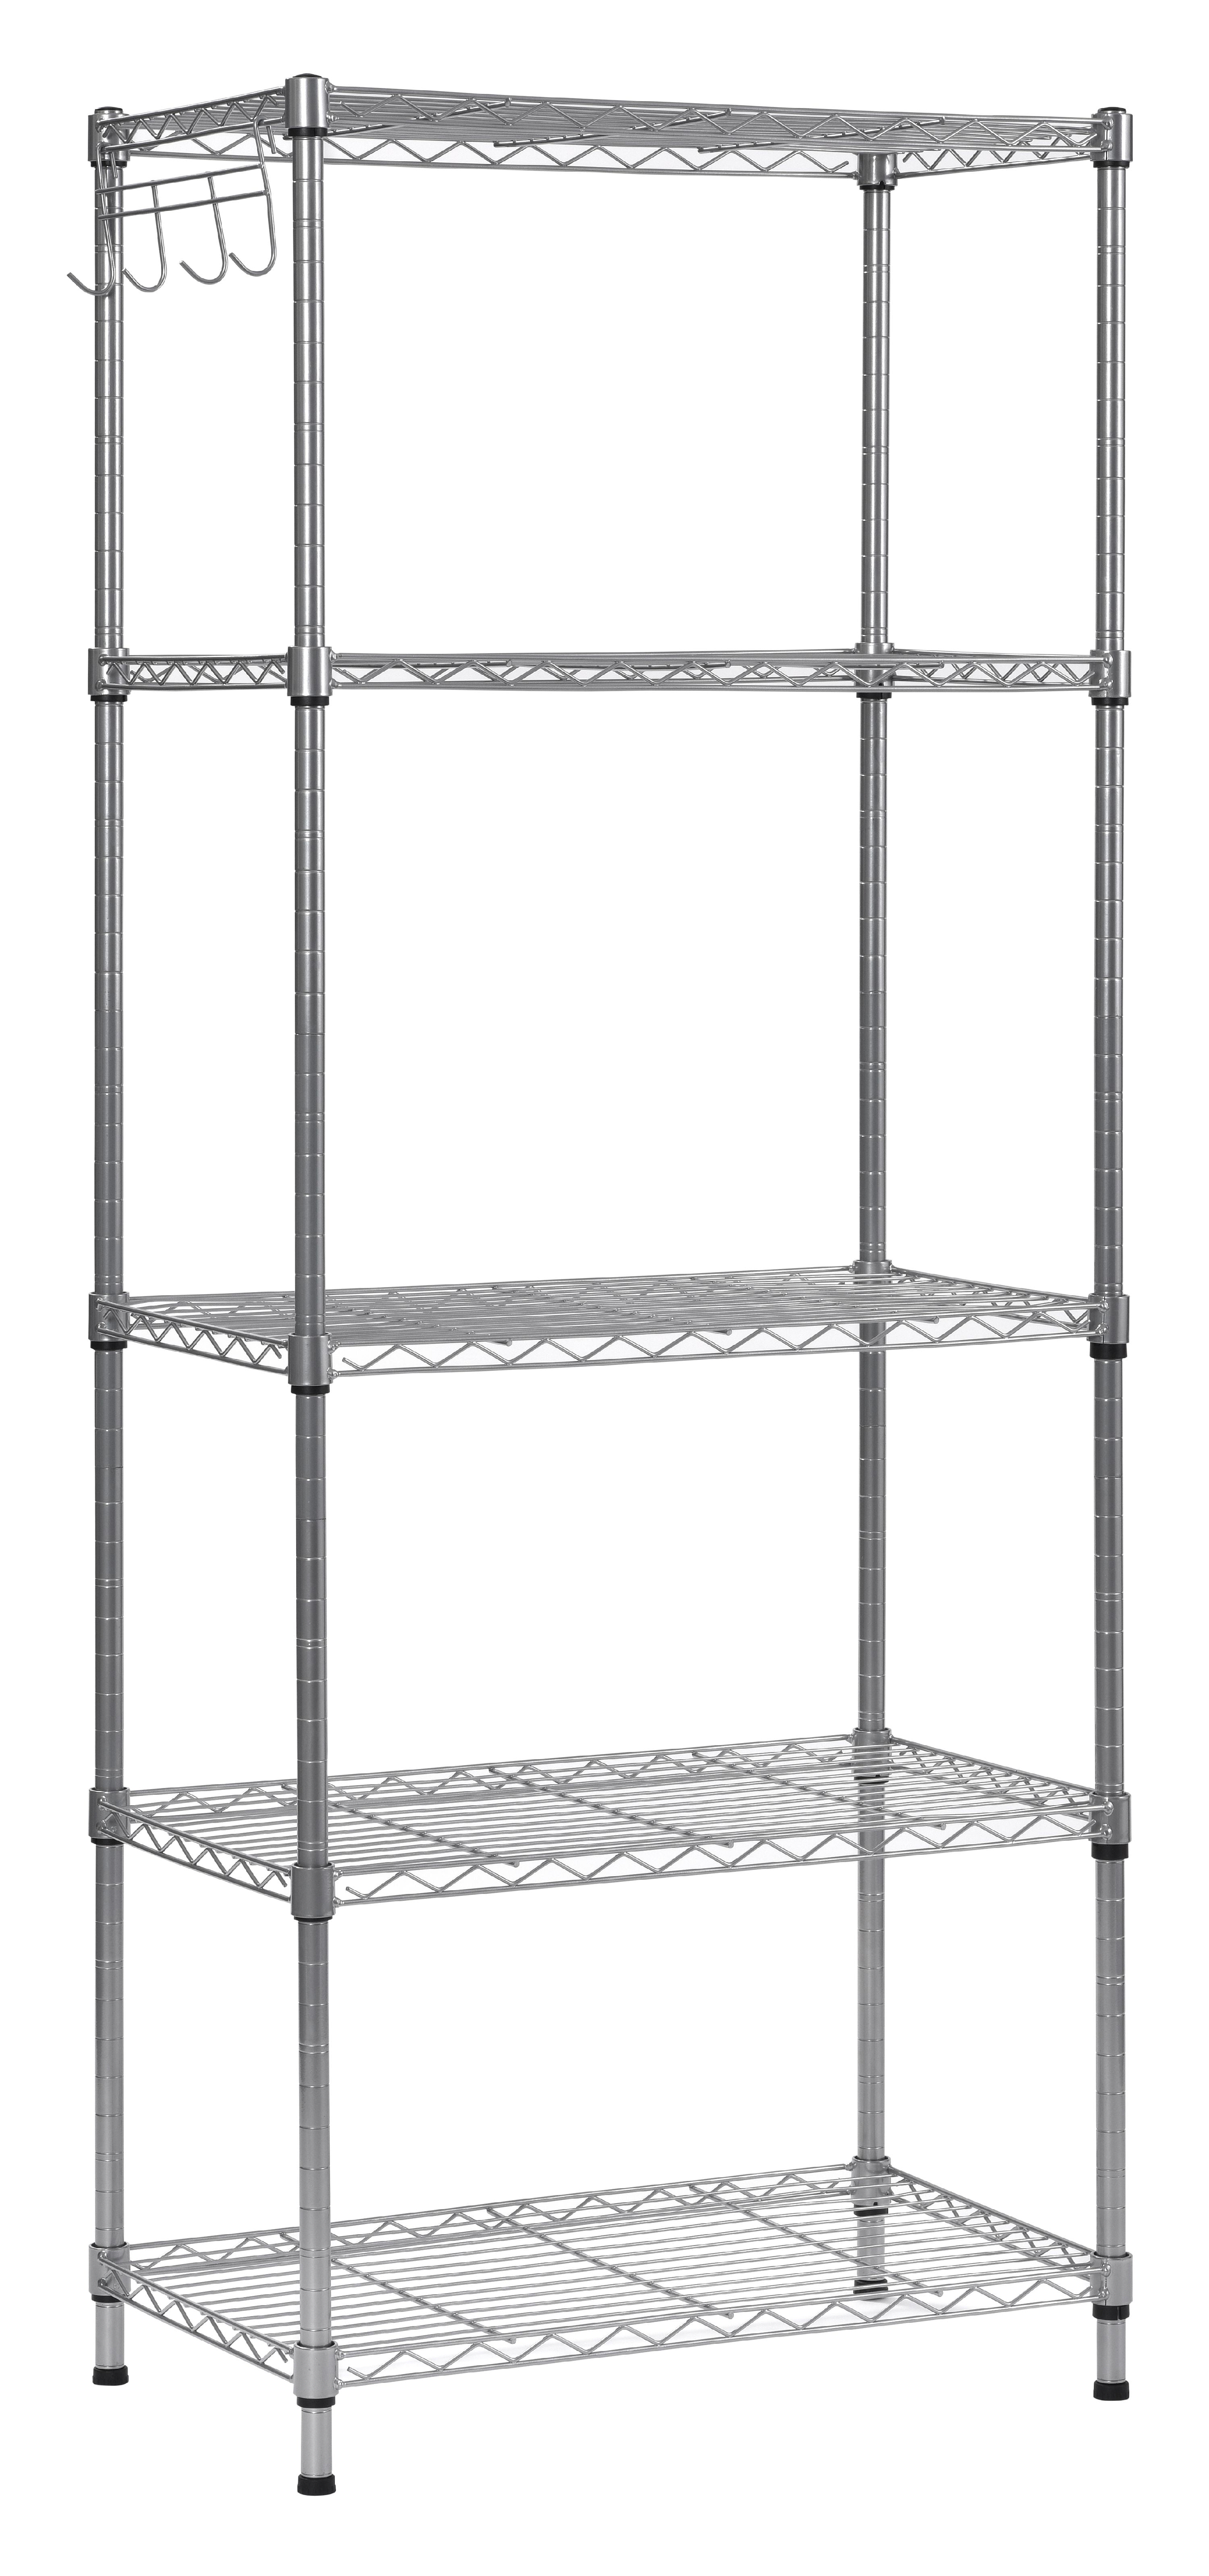 MULSH Wall Mounted Towel Rail 5 Tier Rack Stand for Bathroom or Kitchen White S 